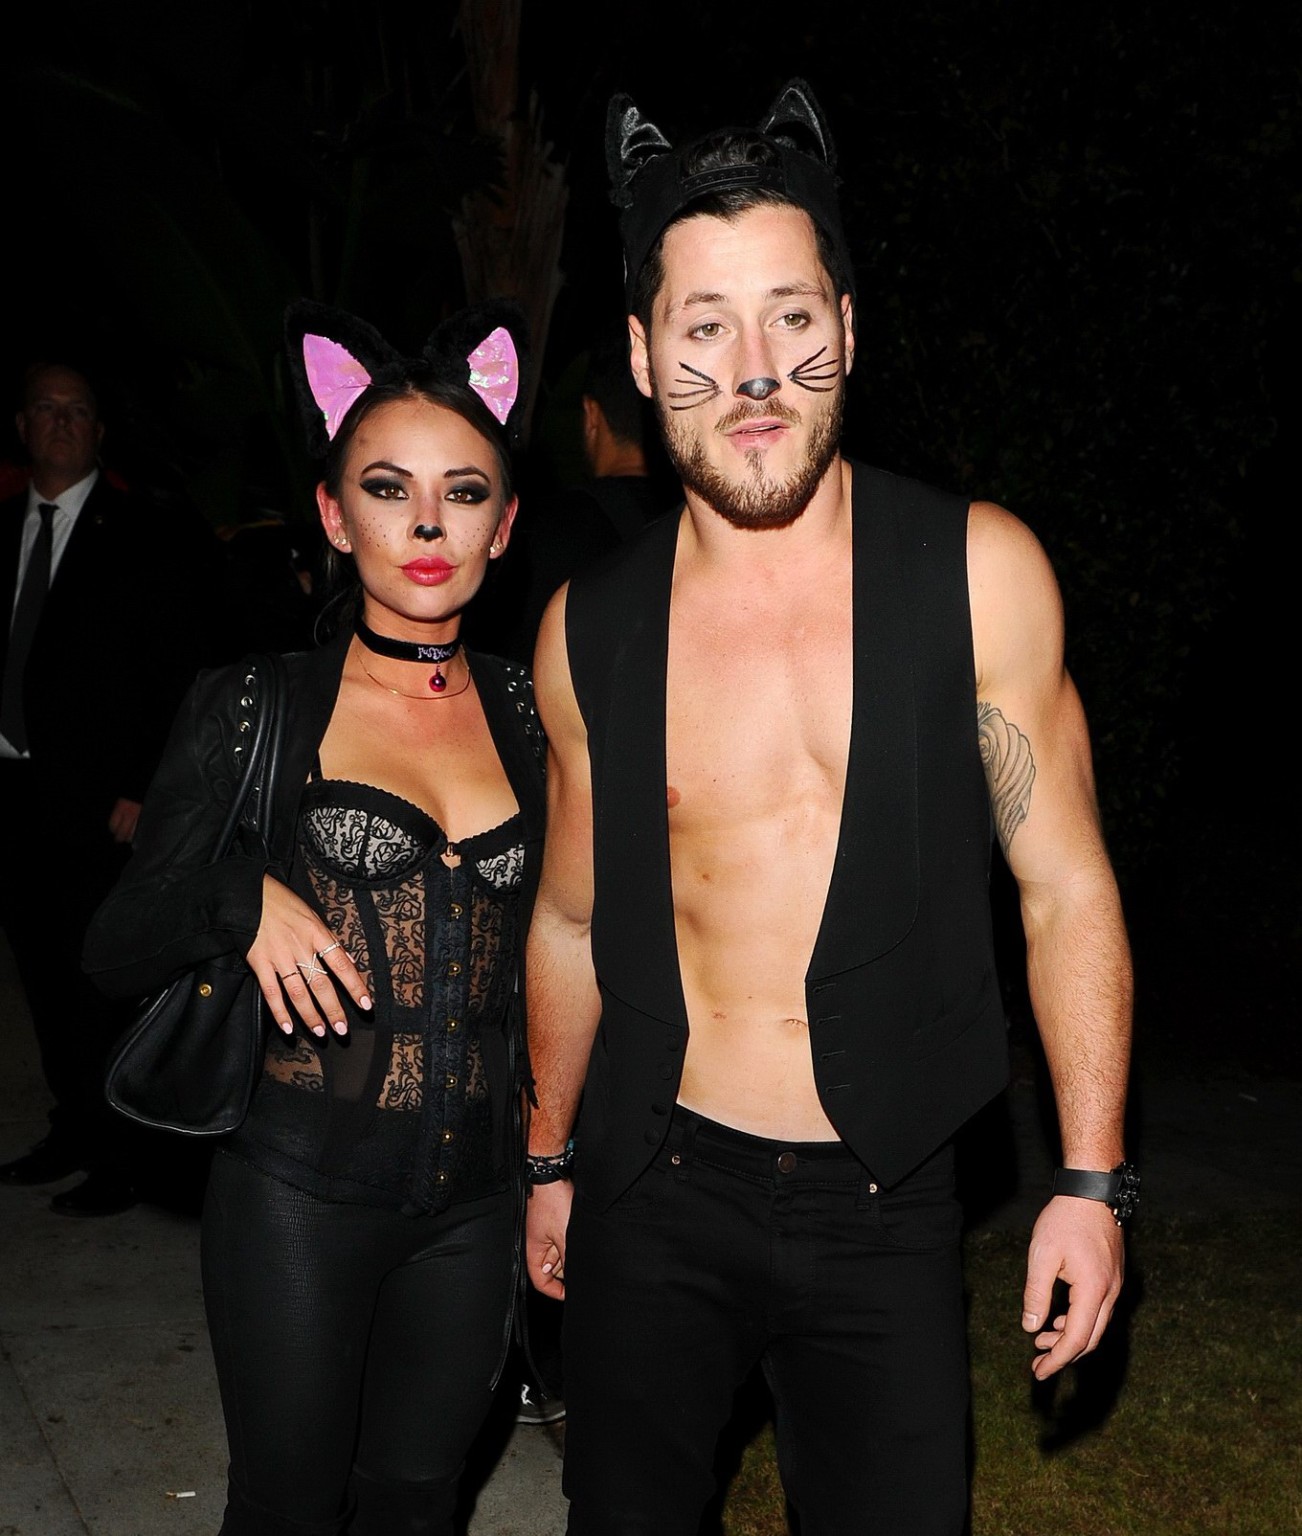 Janel Parrish wearing a sexy cat costume at Casamigos Tequilas Halloween Party i #75182688